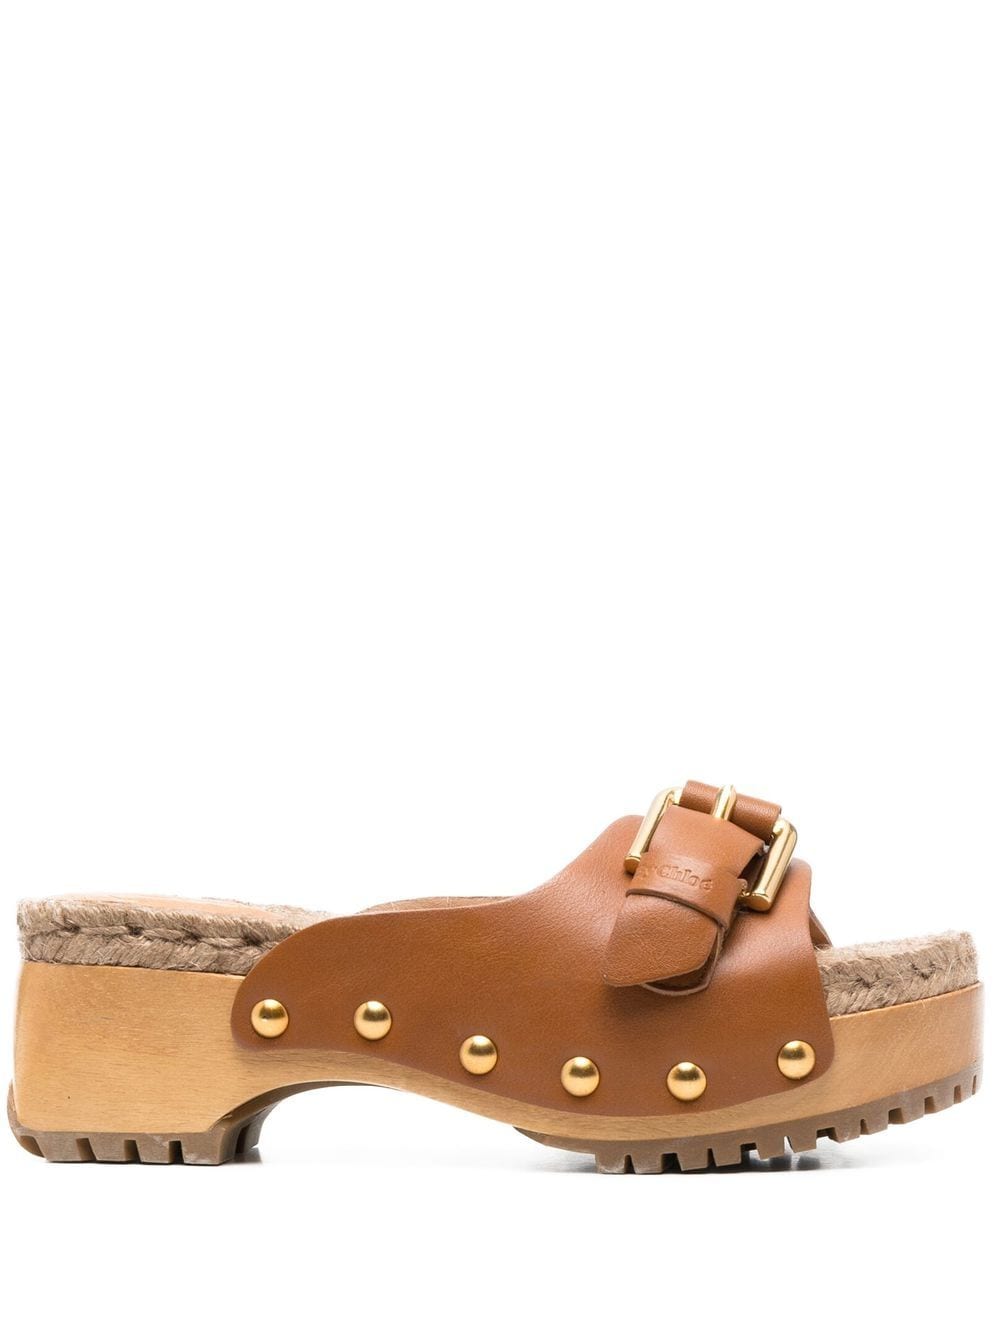 SEE BY CHLOÉ BUCKLE-FASTENING OPEN-TOE 70MM ESPADRILLES